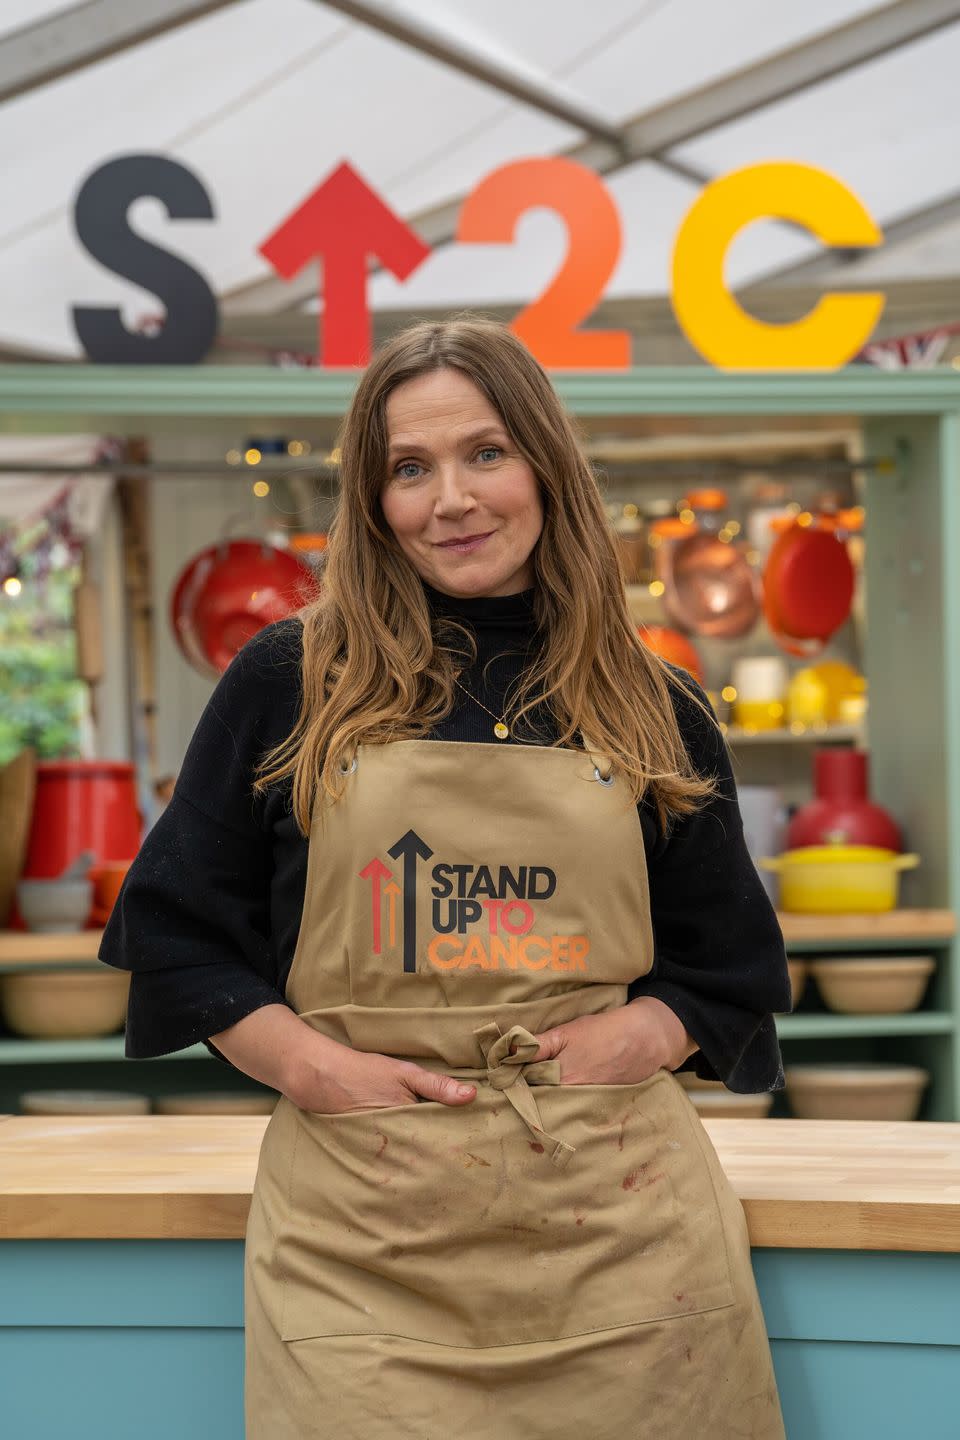 bake off stand up 2 cancer, jessica hynes